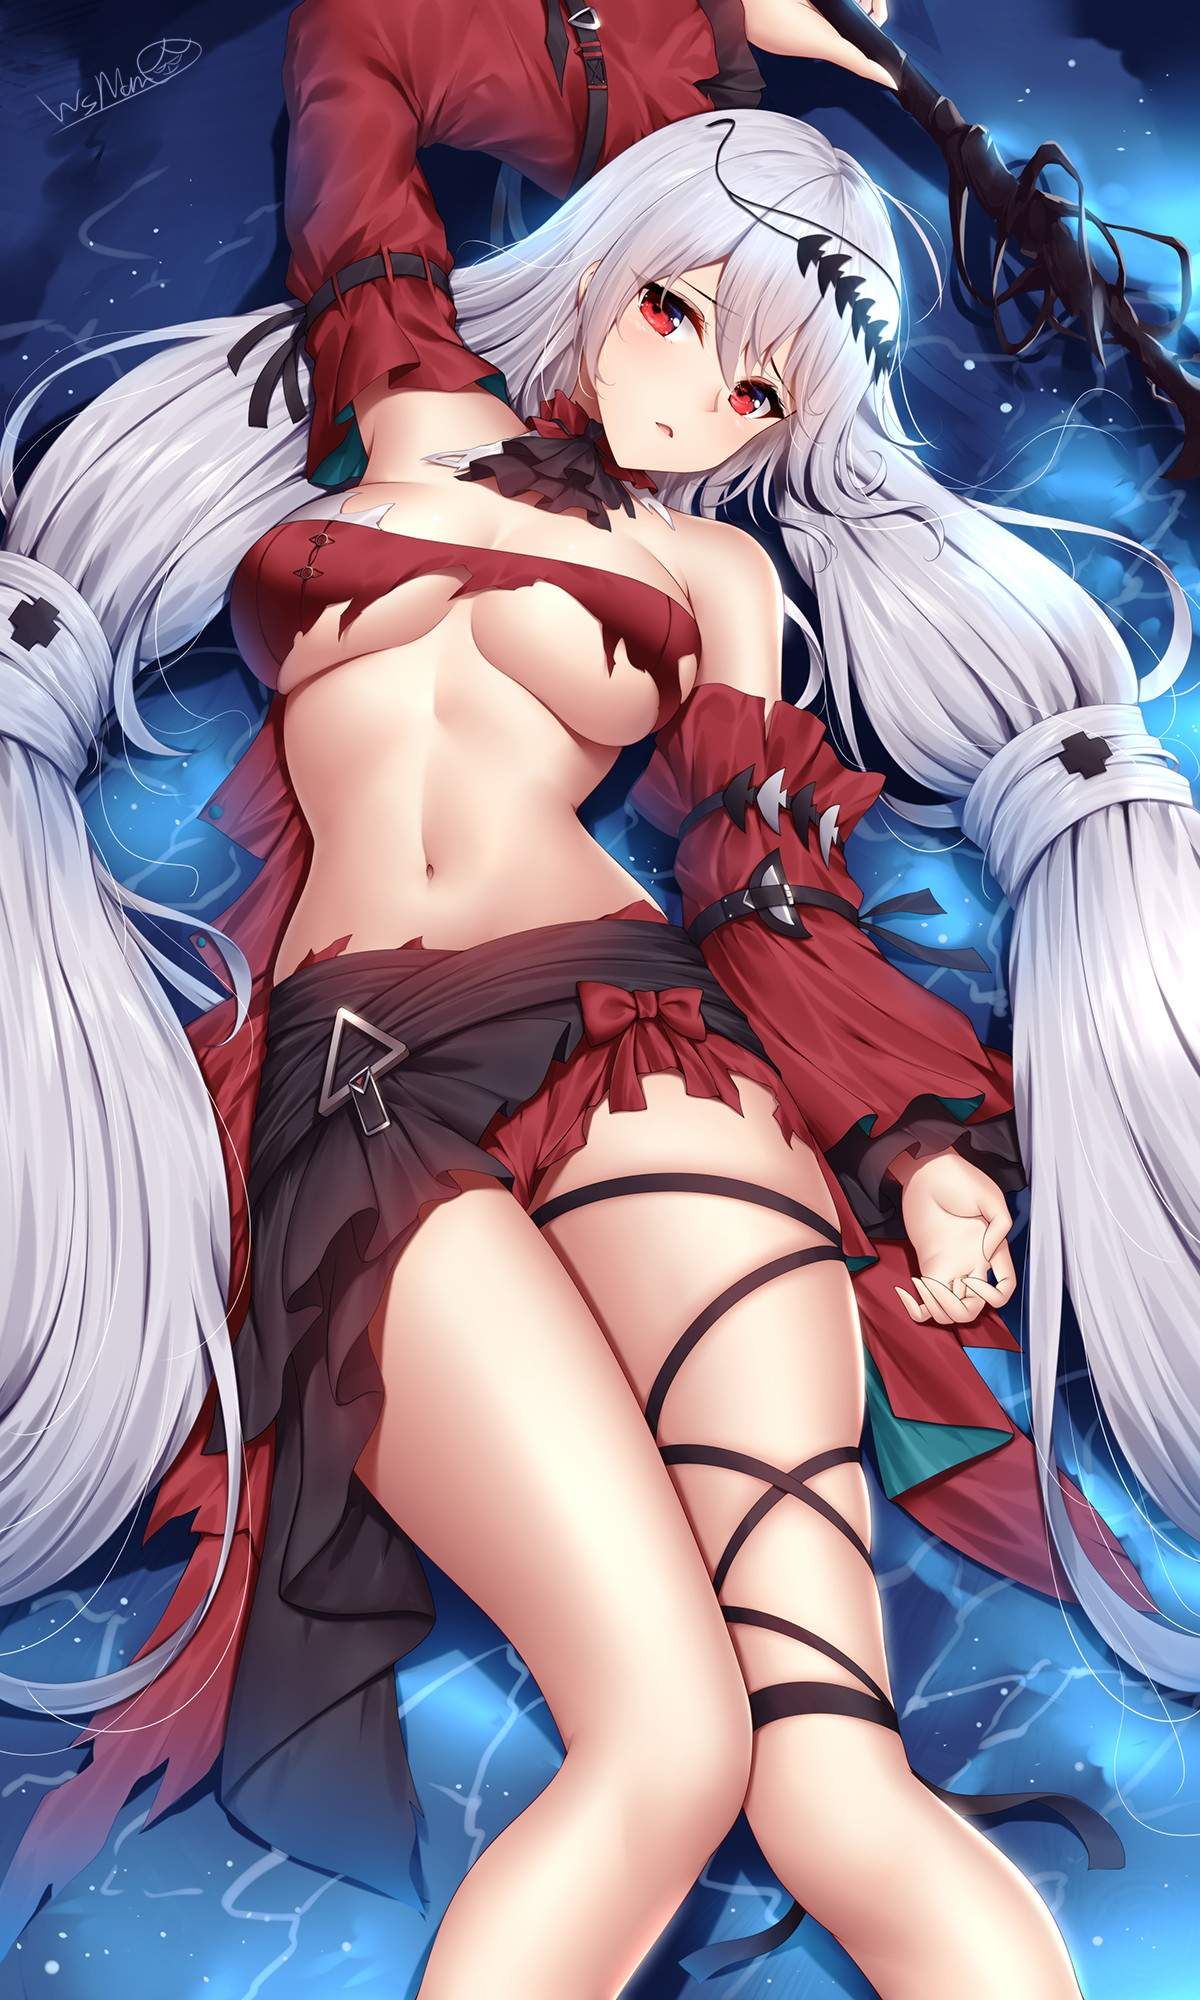 It's an erotic image of Arknights! 6